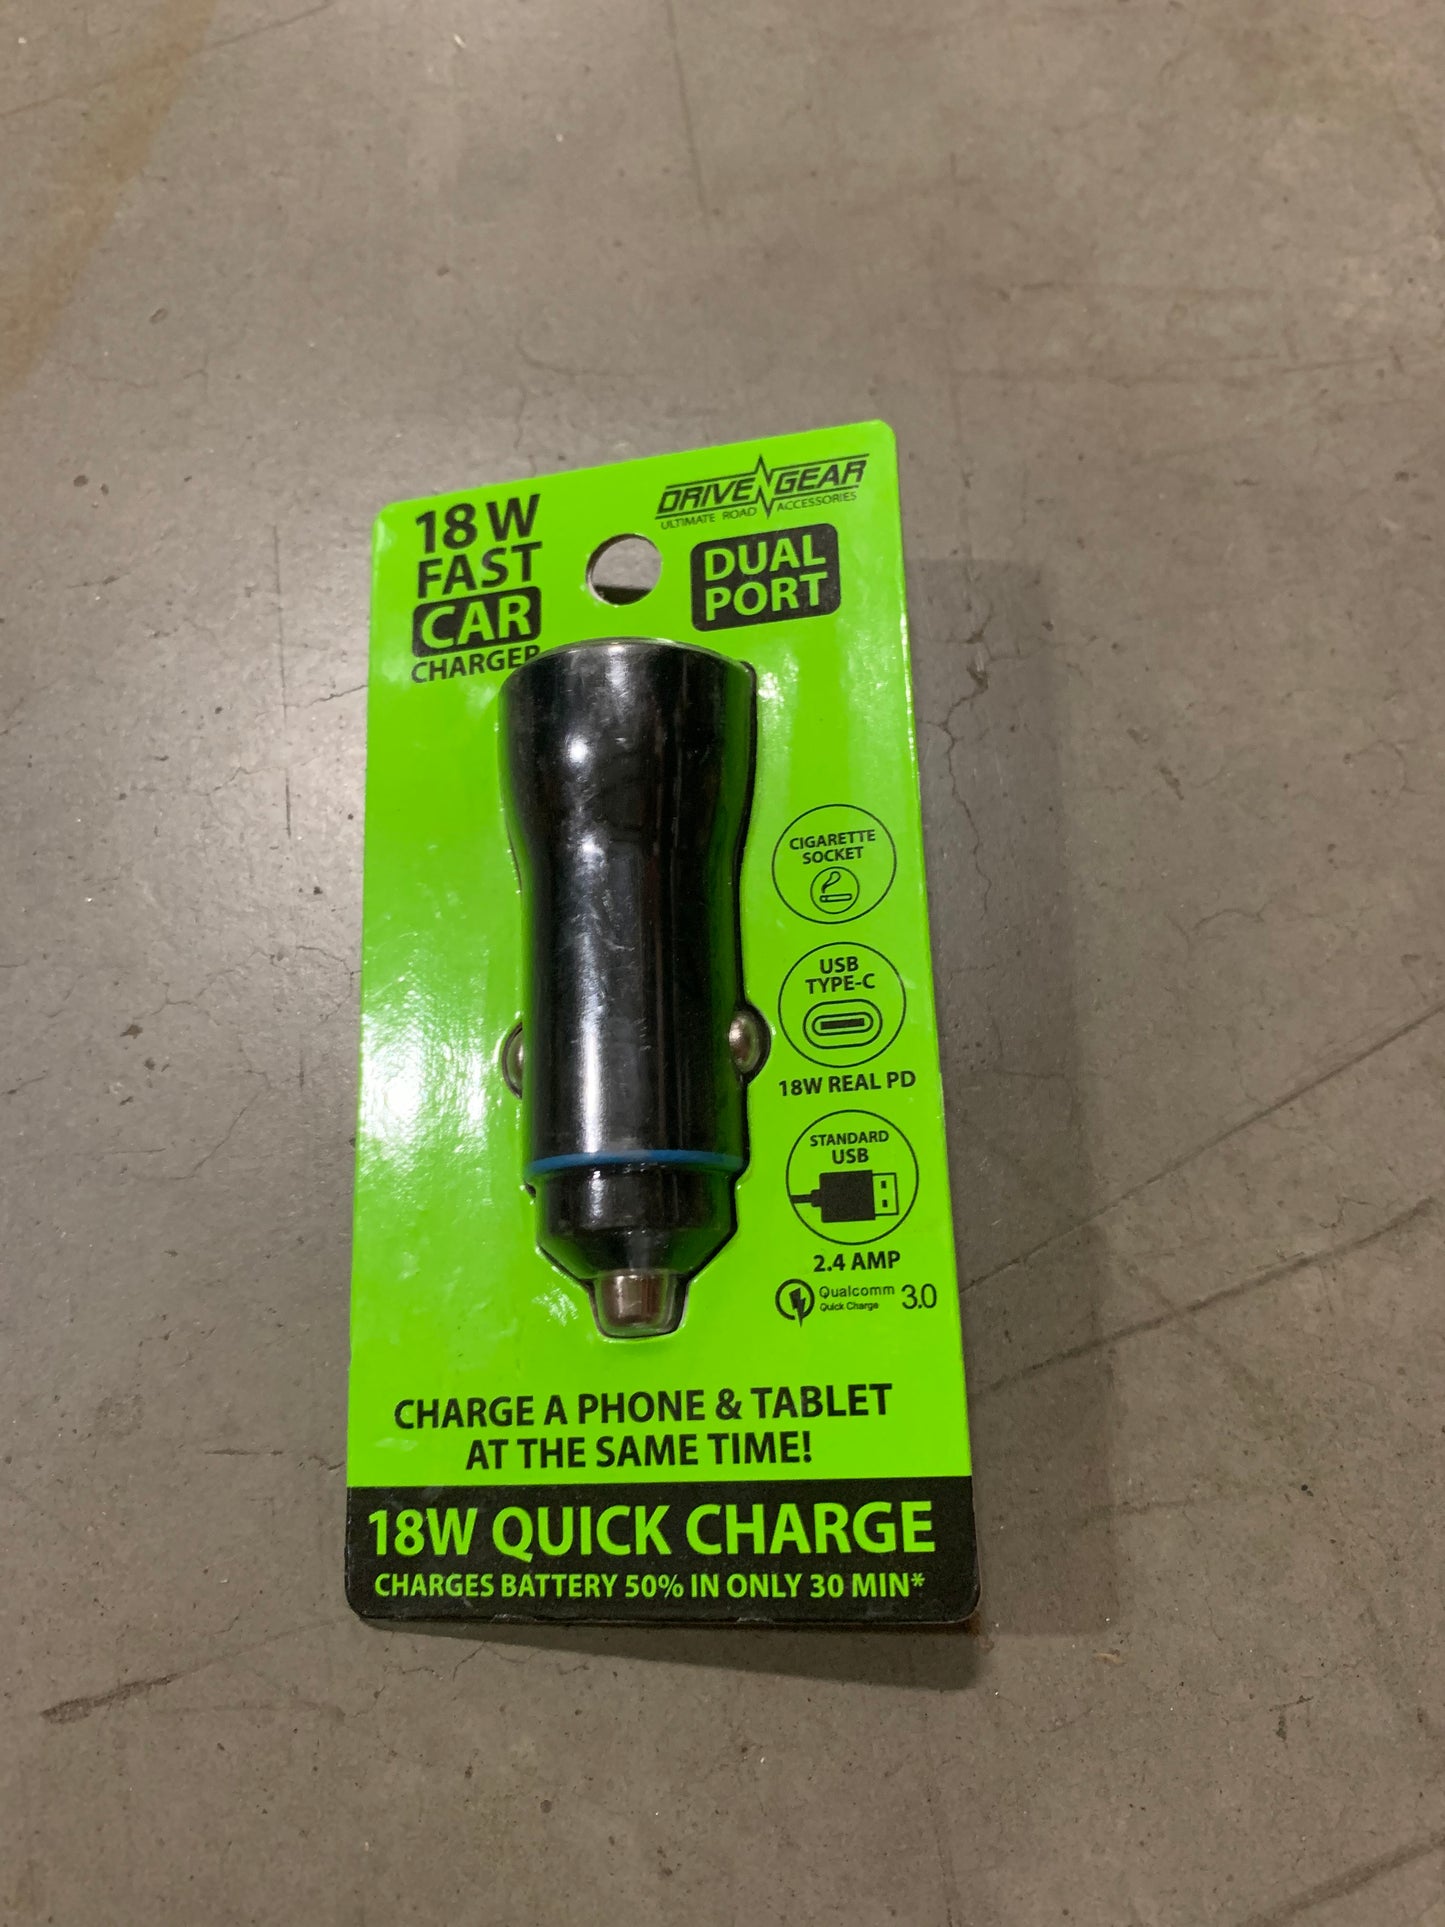 ITEM NUMBER 021739L 18W QUICK CAR CHARGER - STORE SURPLUS NO DISPLAY 4 PIECES PER PACK